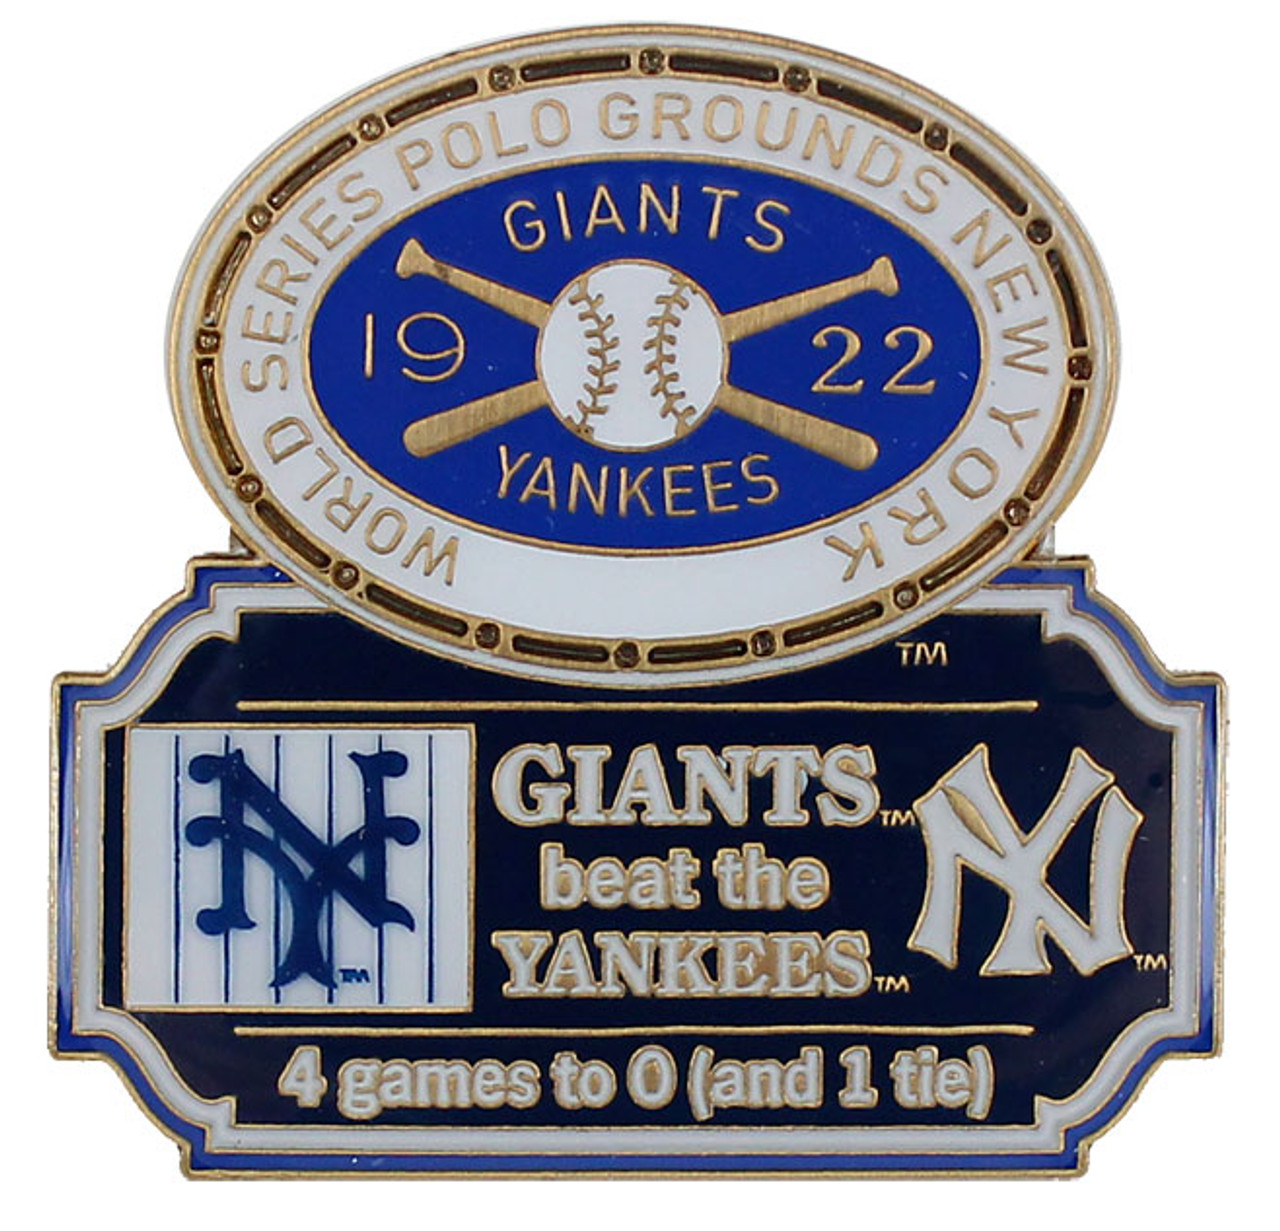 New York Yankees 27-Time World Series Champions Pin - Limited 1,000